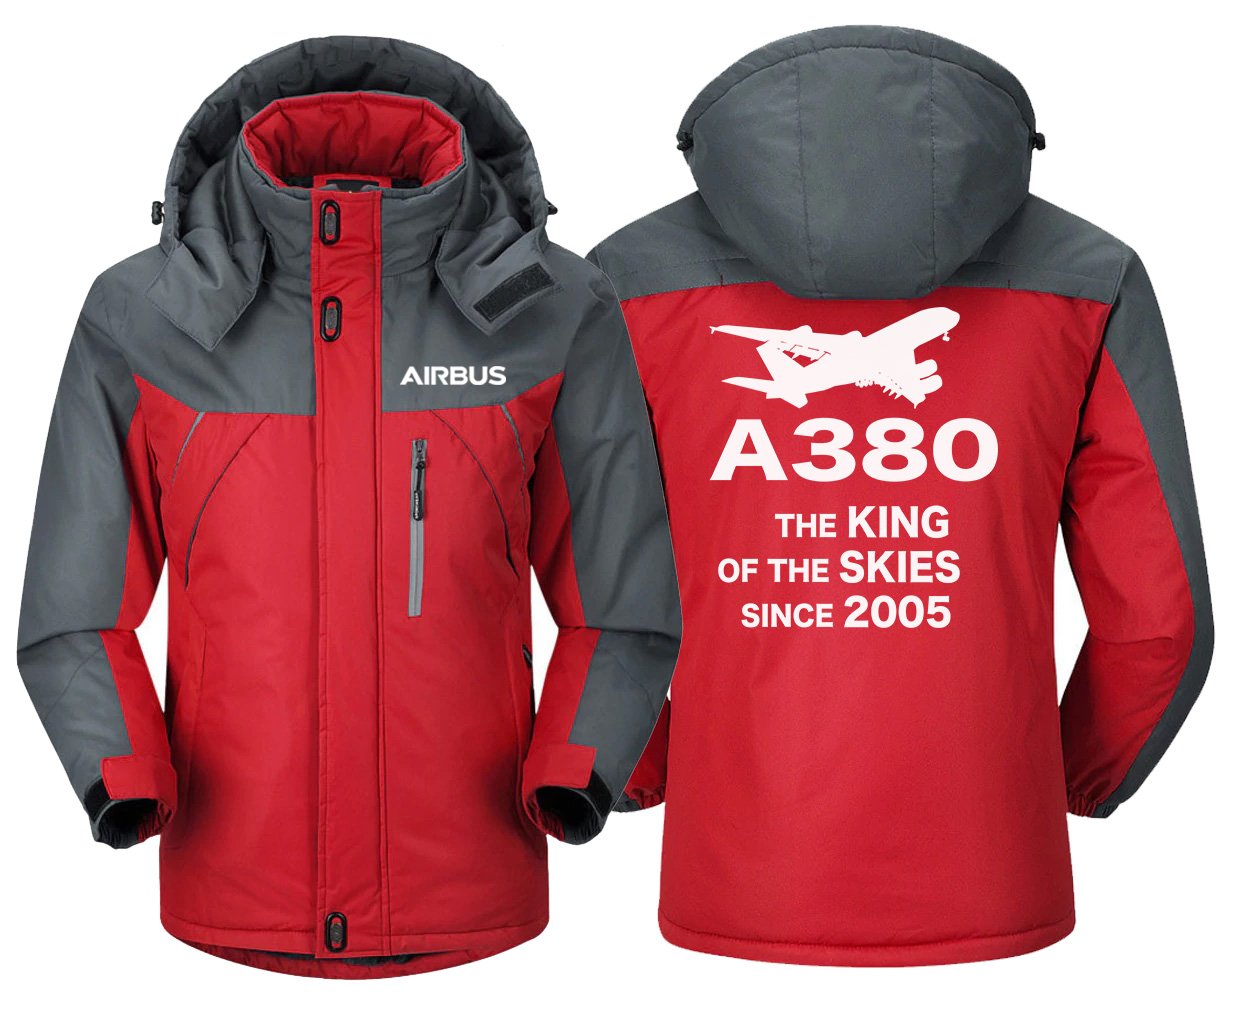 AIRBUS A380 THE KING OF THE SKIES SINCE 2005 DESIGNED WINDBREAKER THE AV8R